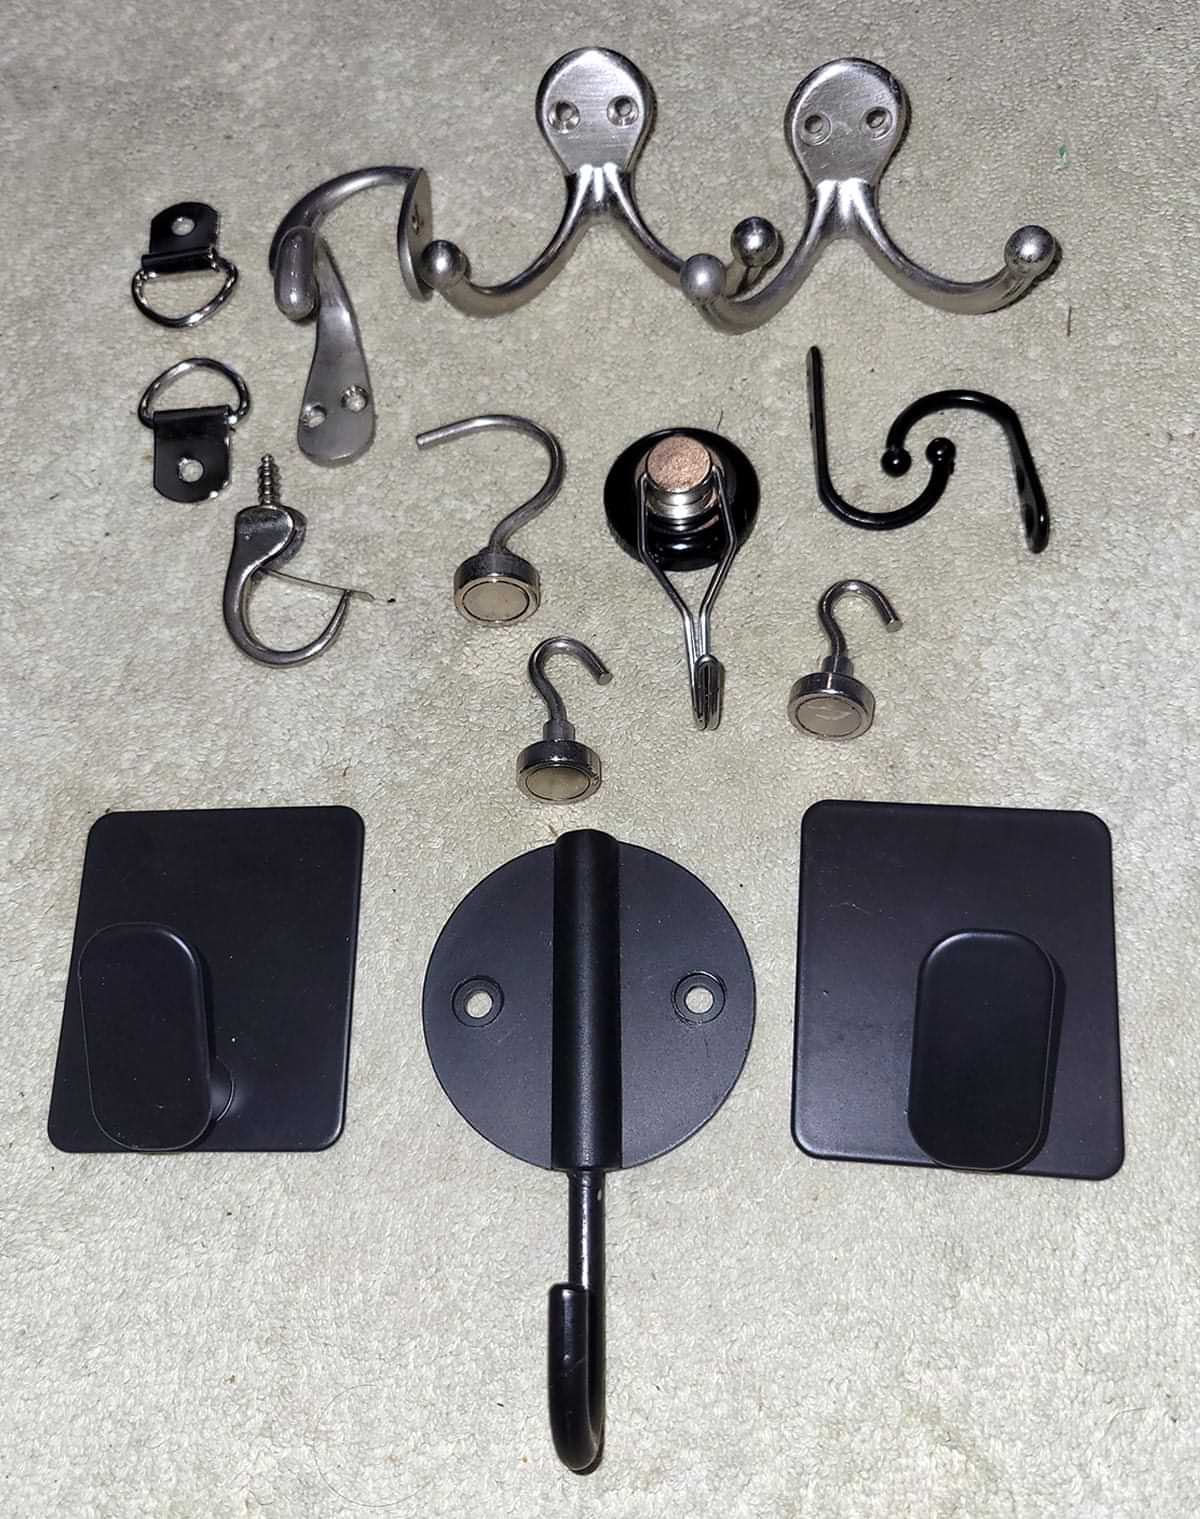 various hook types, including magnetic, adhesive and screw-in, placed on a surface